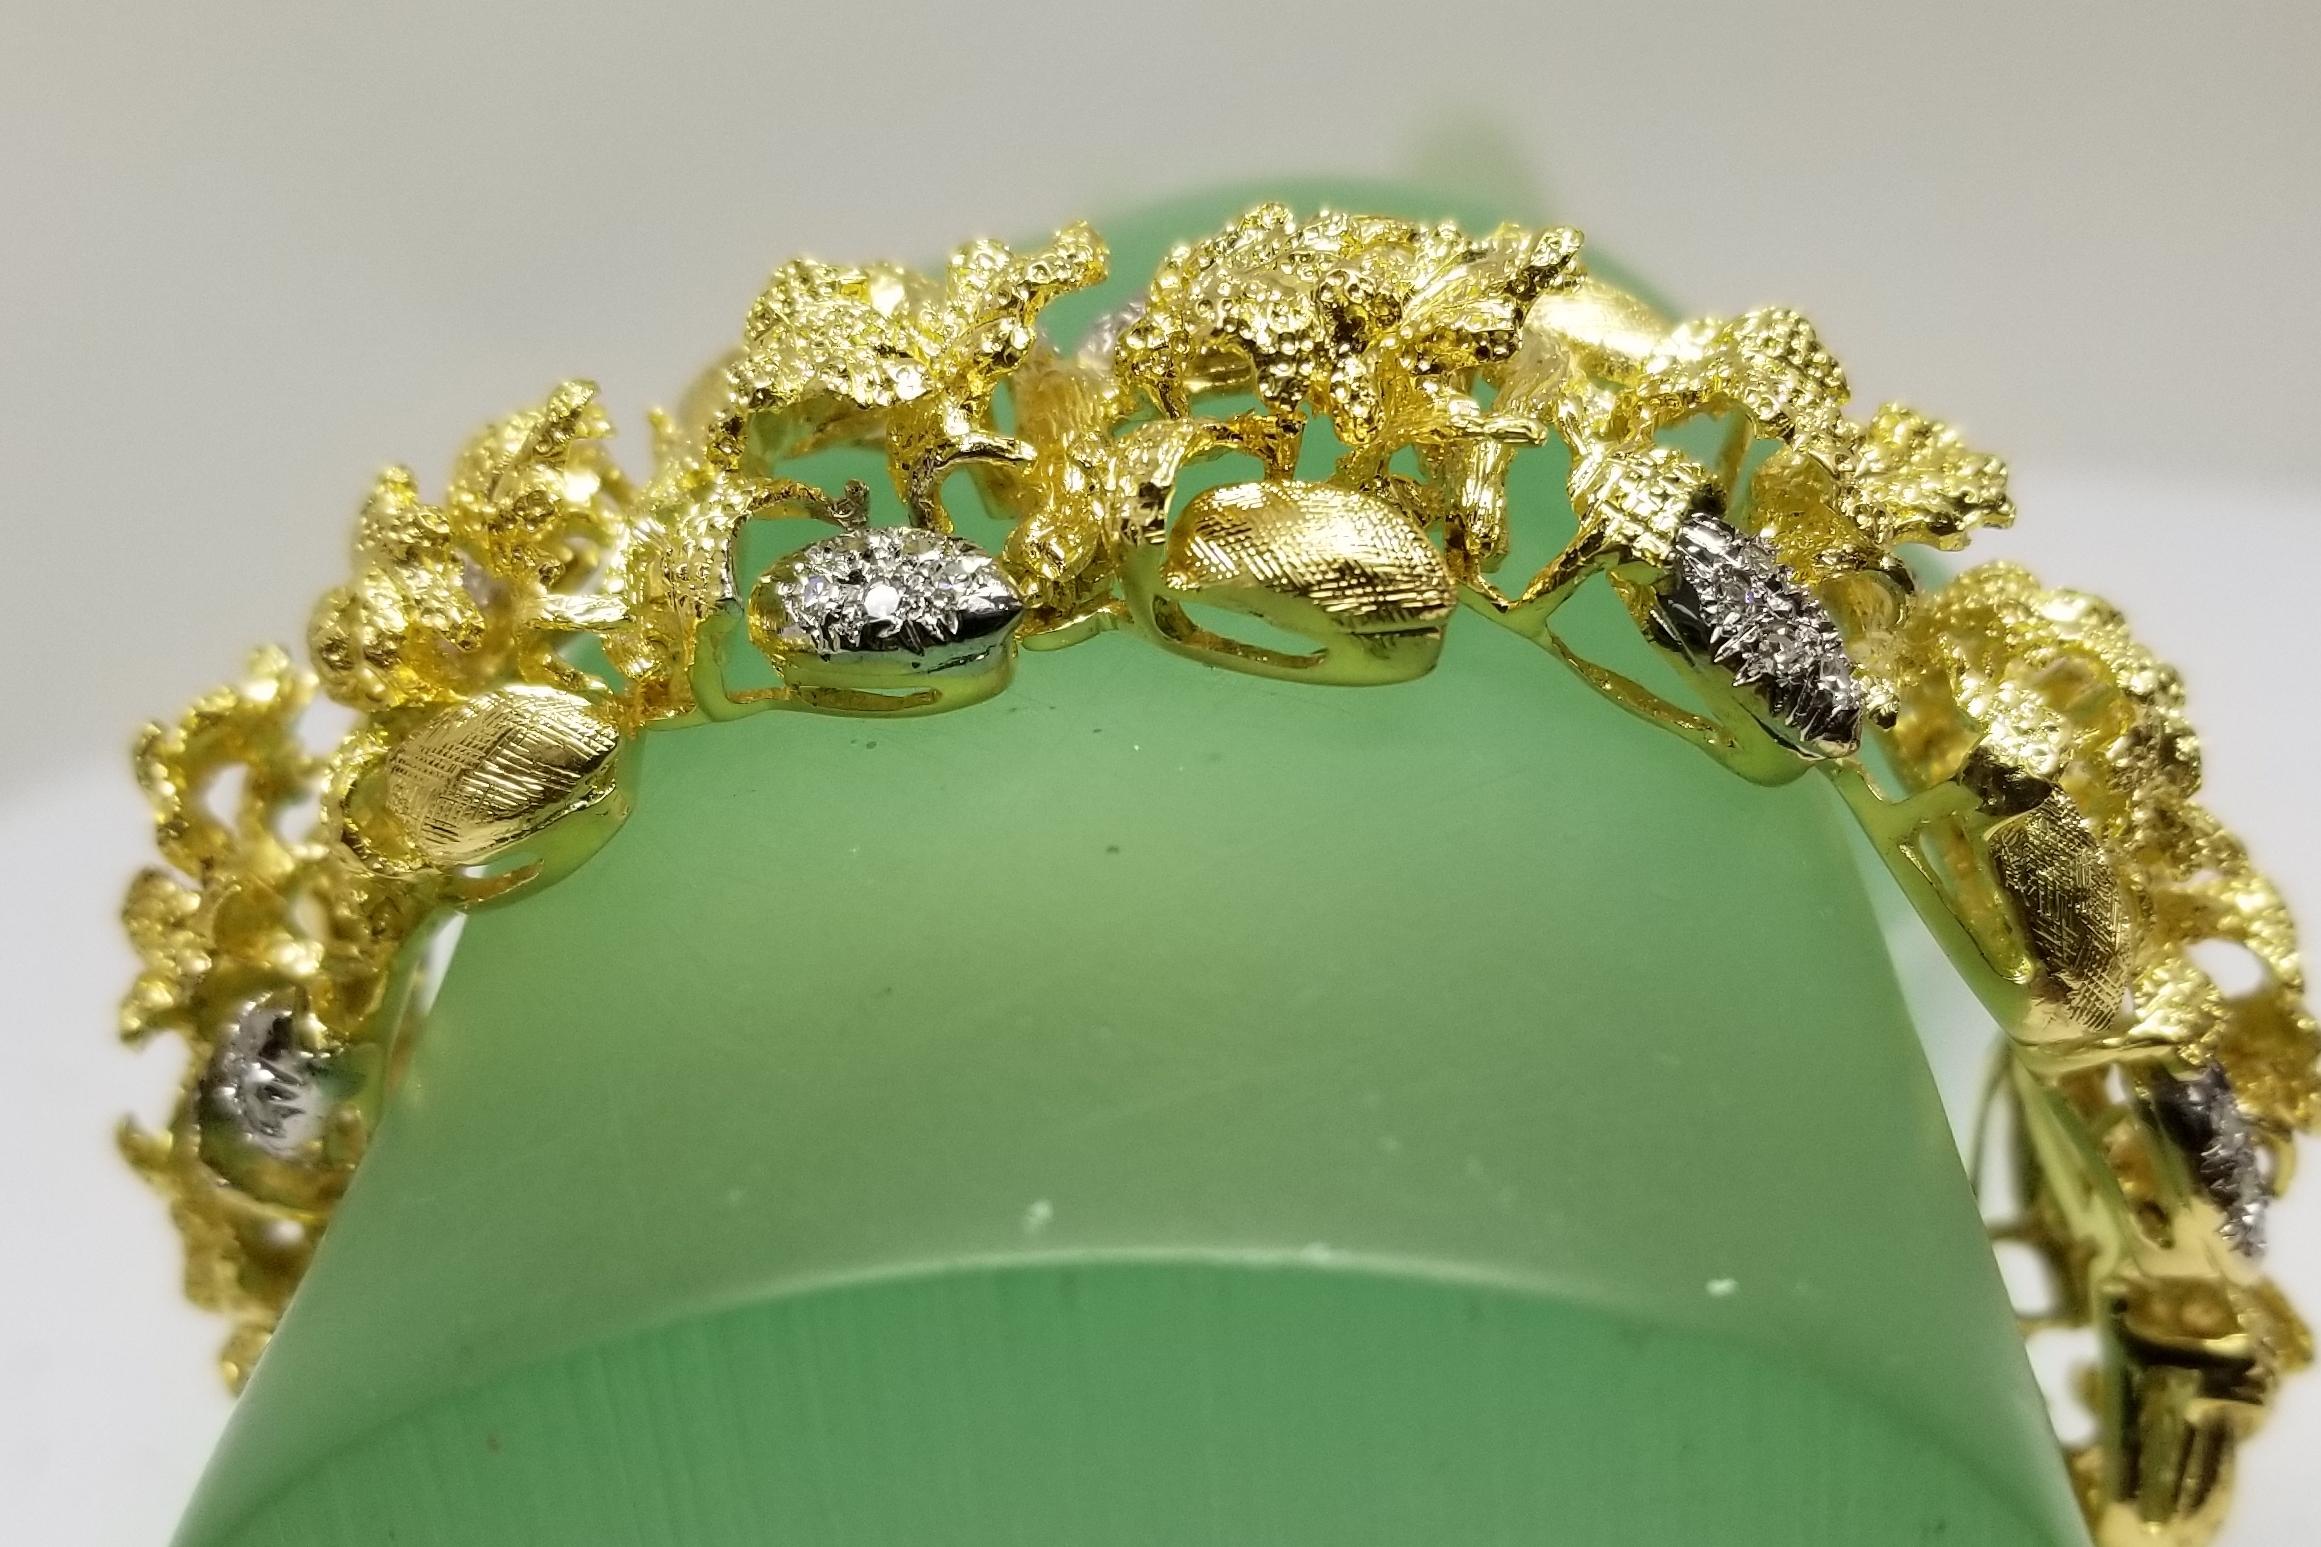 Circa 1960s Vintage 18 Karat Yellow Gold Diamond Acorn and Leaf Bracelet In Excellent Condition For Sale In Los Angeles, CA